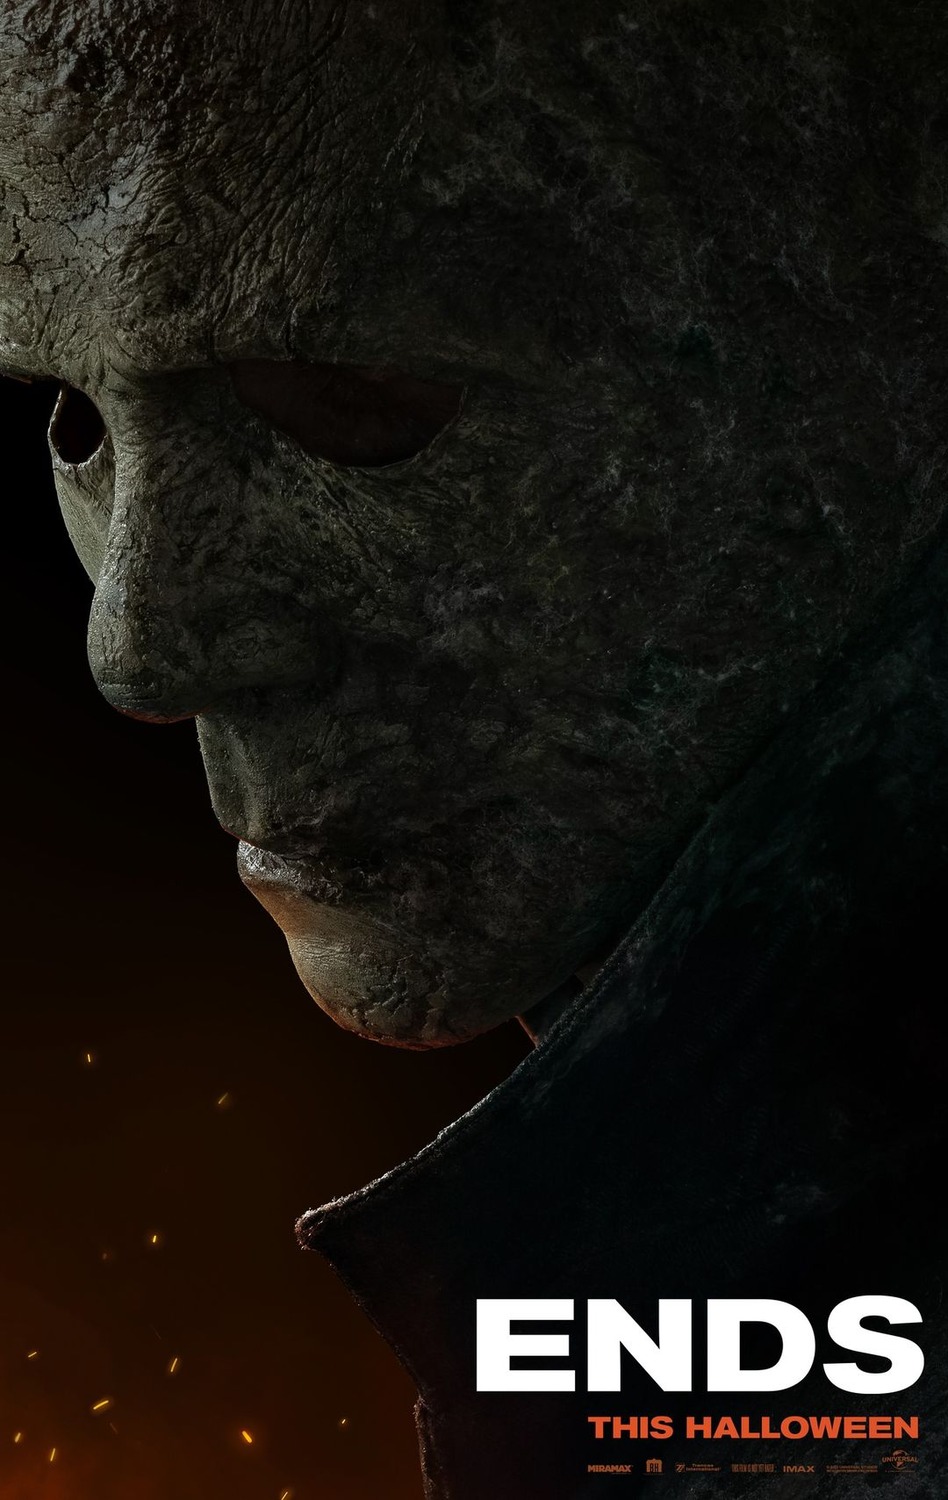 Halloween Ends (2022) 7:30 P.M. Tuesday Special @ O'Brien Theatre in Renfrew